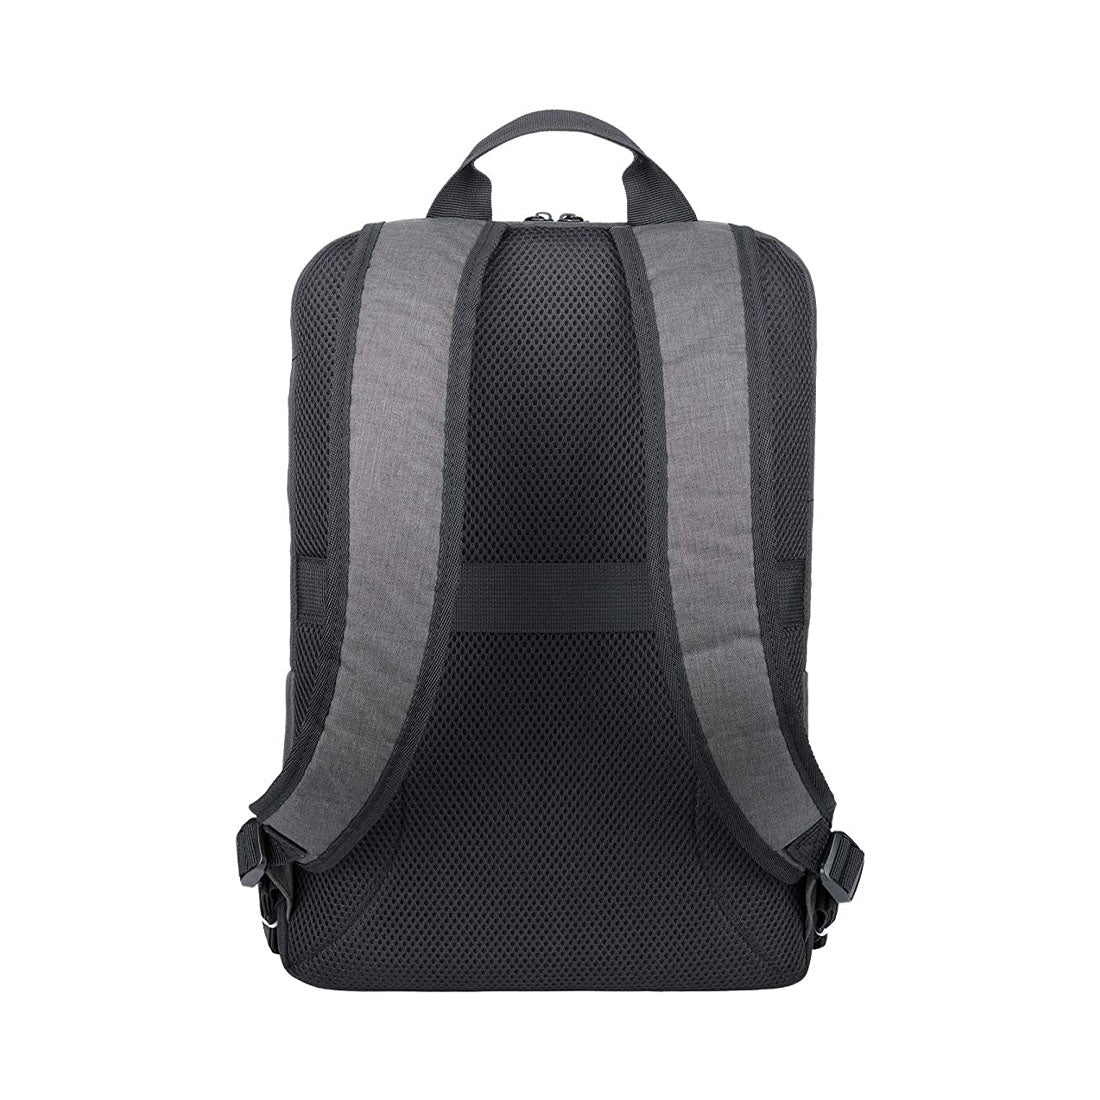 ASUS BP1504 15-inch Lightweight Laptop Backpack with Padded Shoulder Straps